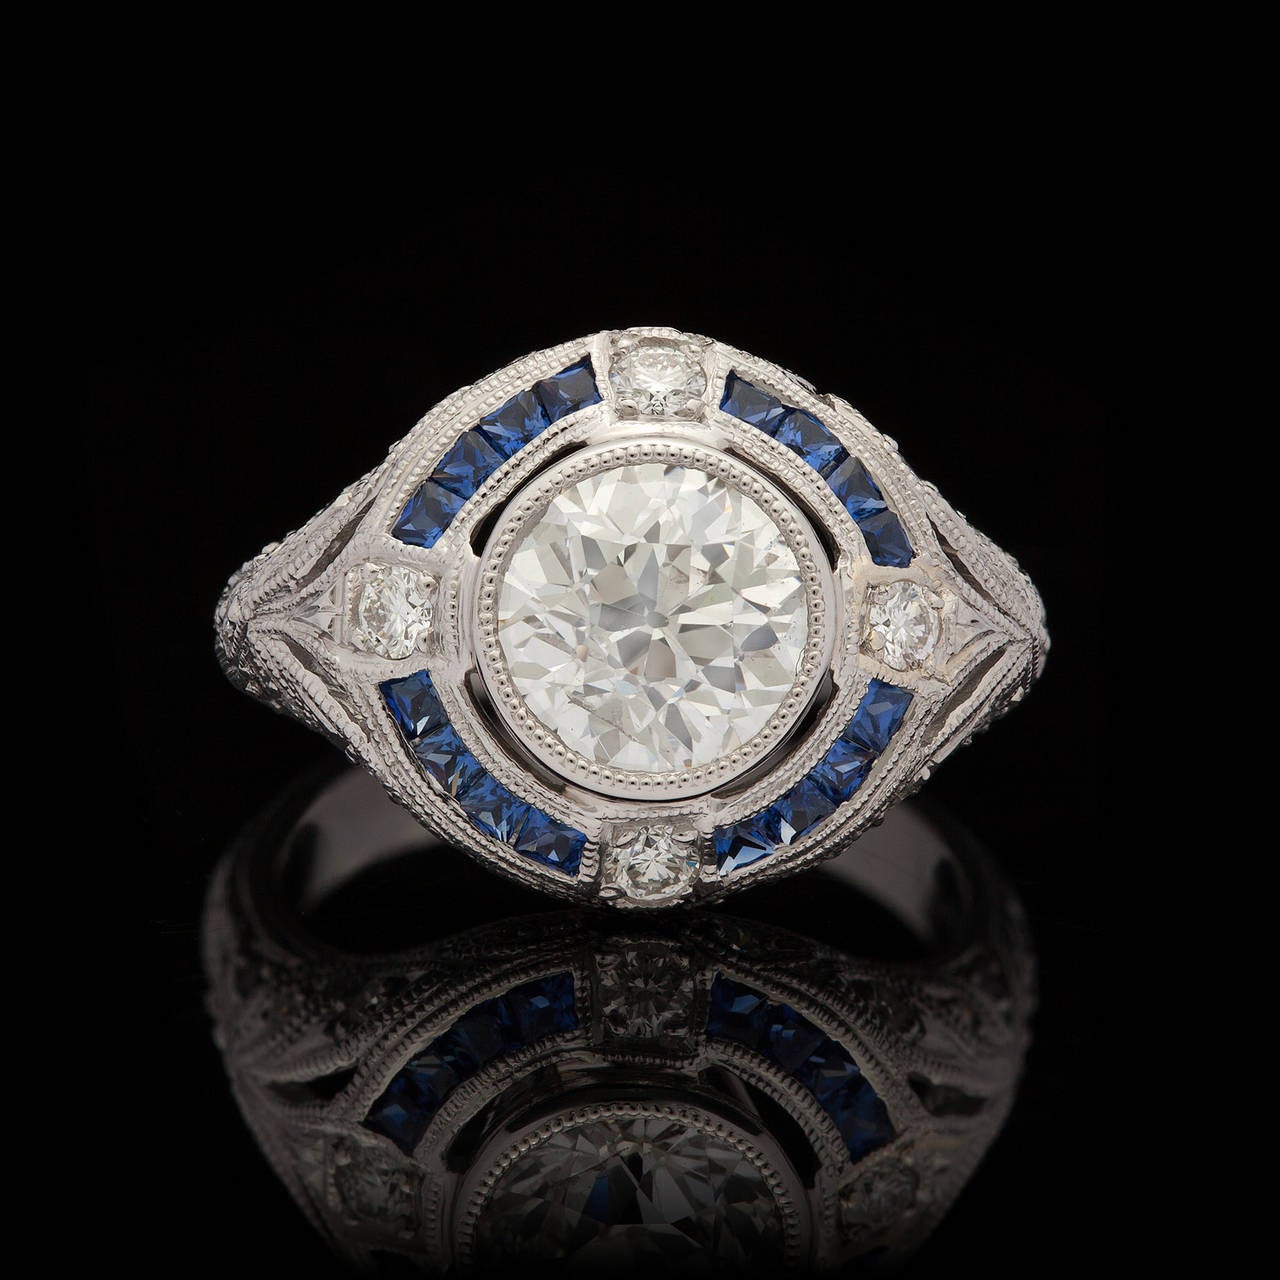 Platinum custom ring features one European cut J color, SI1 clarity diamond for a total approximate weight of 1.60cts, set with an additional 22 round cut diamonds for approximately 0.32cts and 16 blue sapphires for a total weight of 0.45cts. The